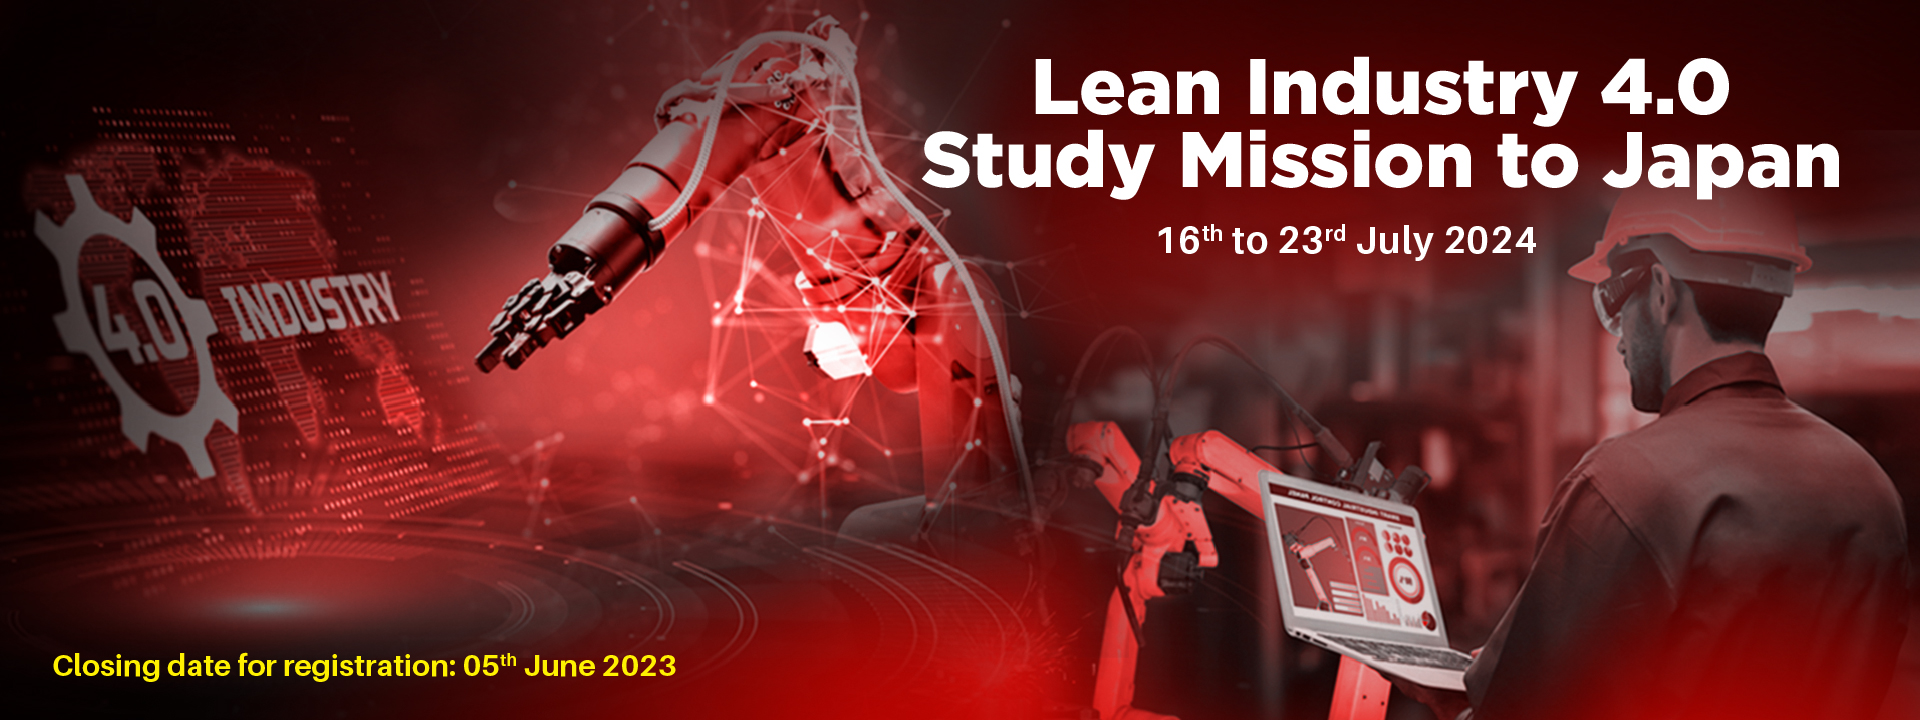 Lean Industry 4.0 Study Mission to Japan